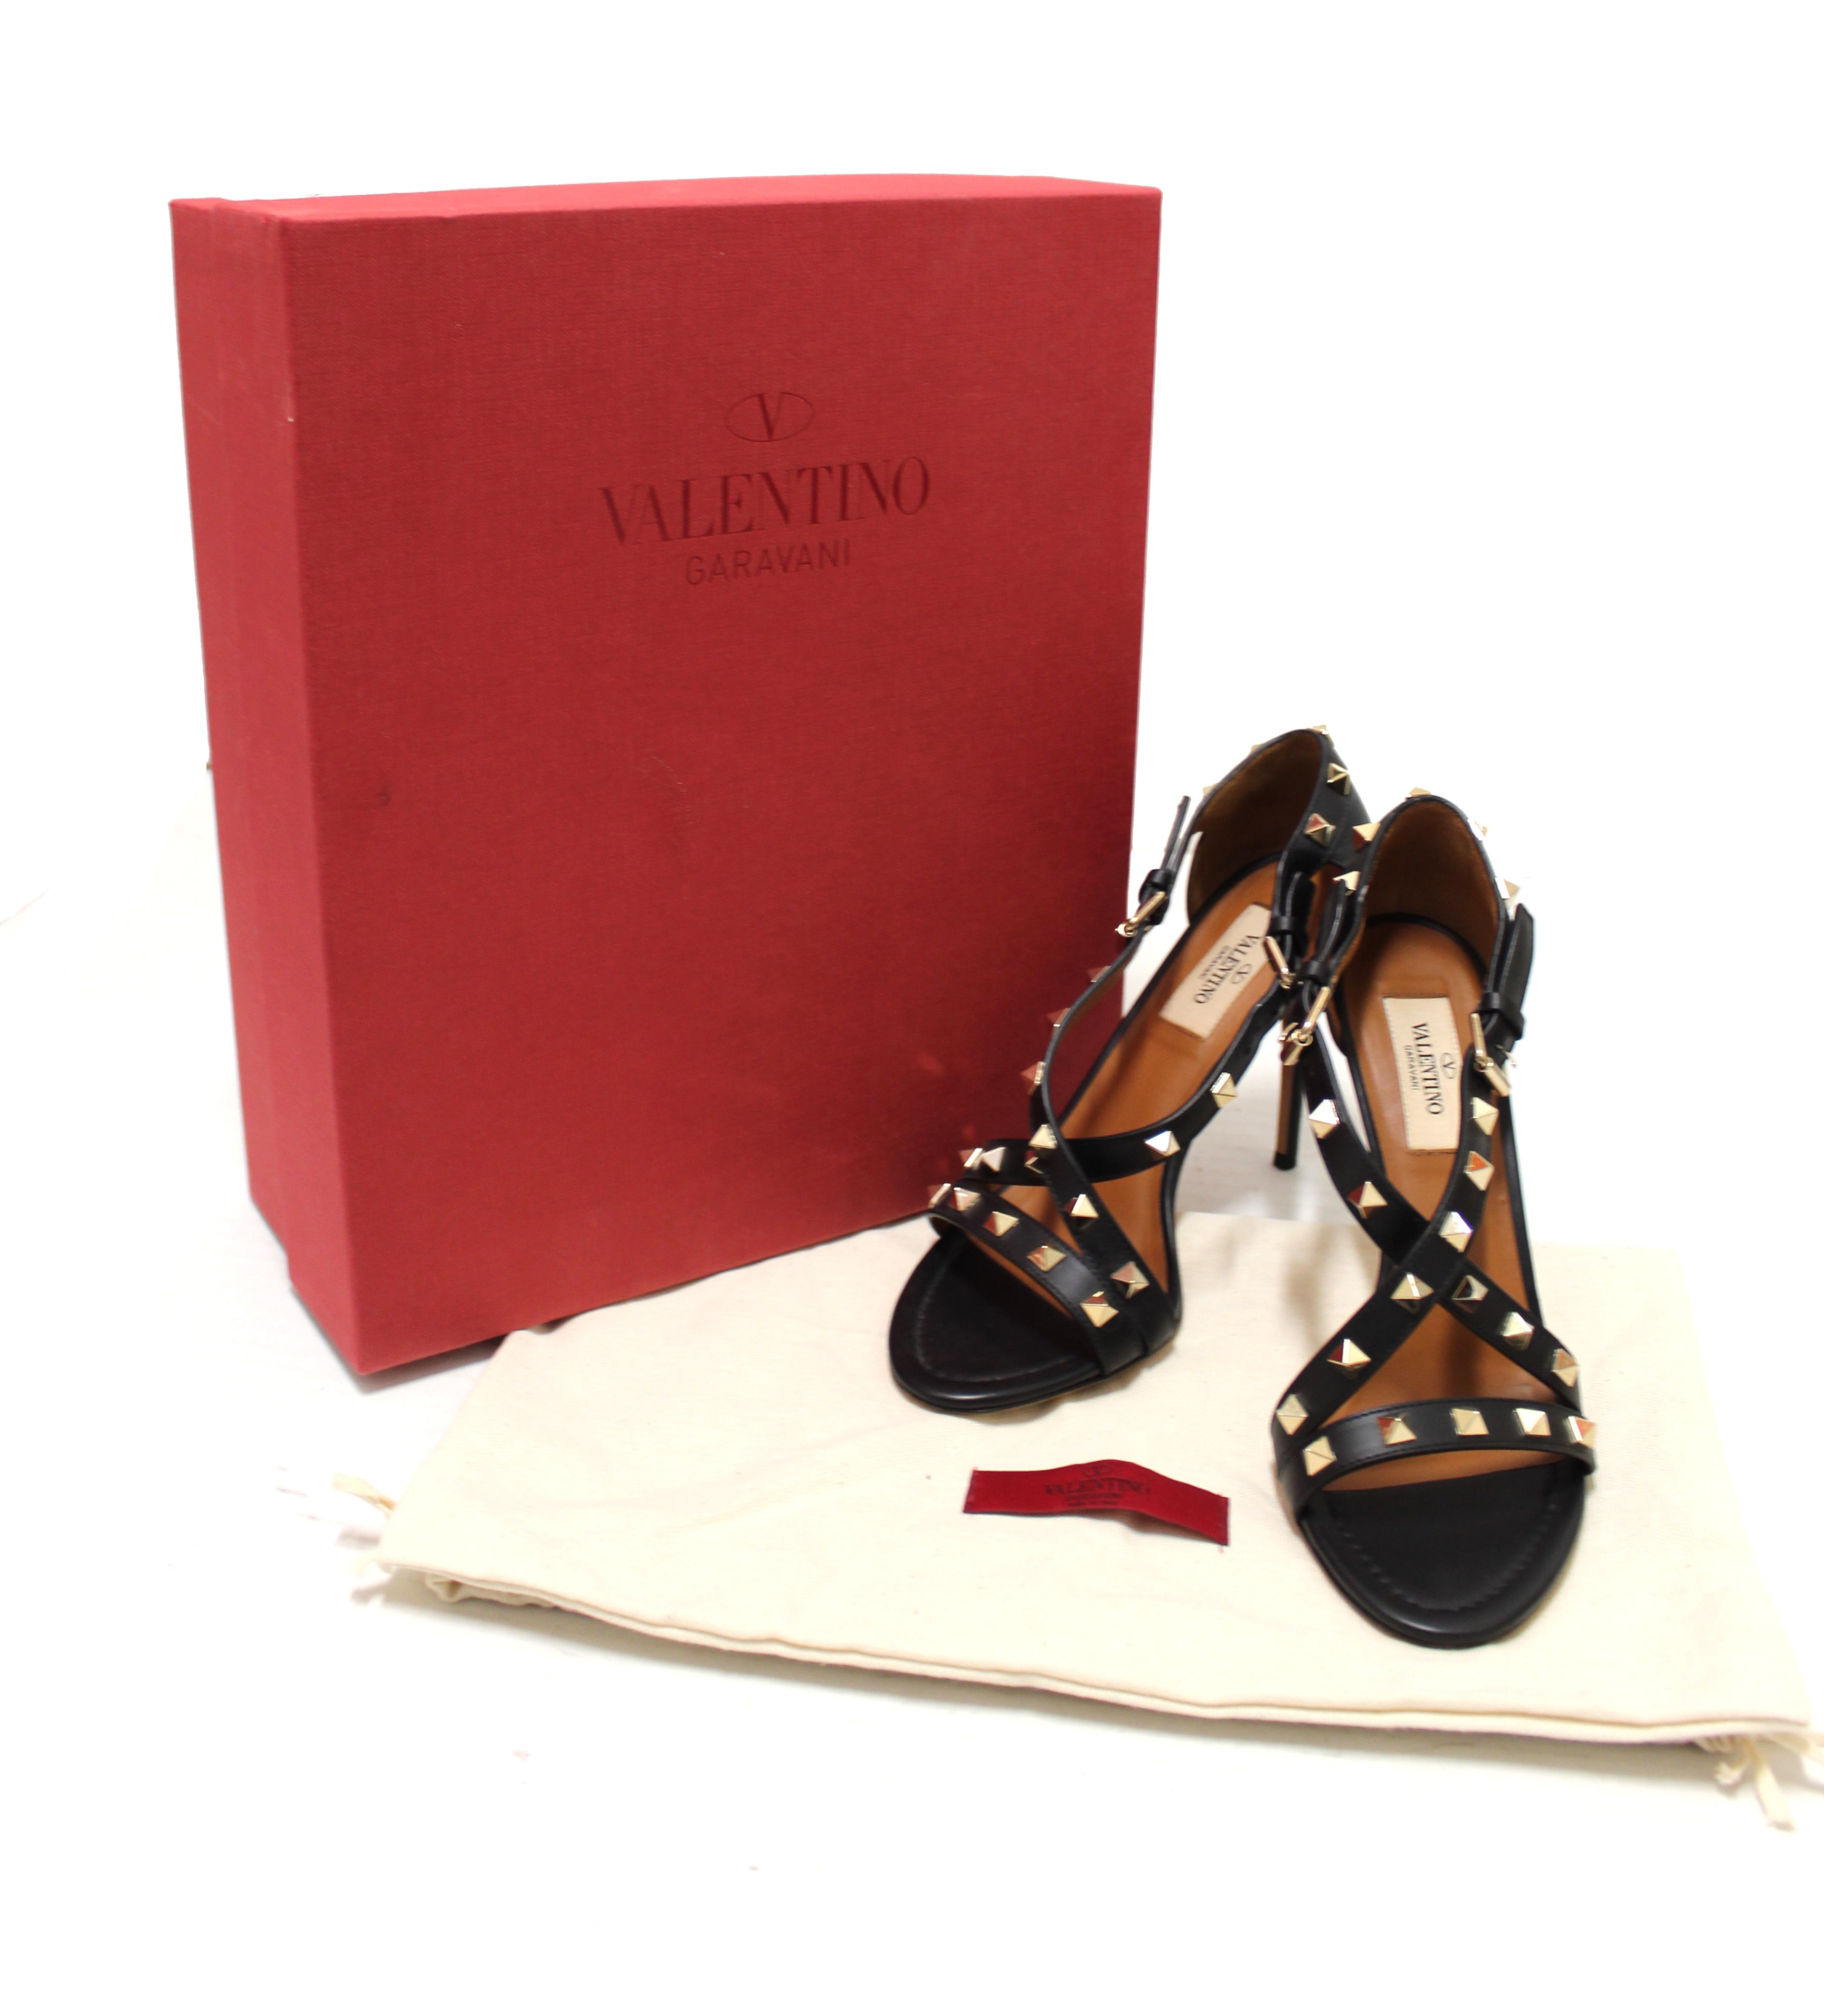 Authentic Valentino Black Rockstuds Strappy Sandals Heels Shoes Size 36 MW1S0B44VOT